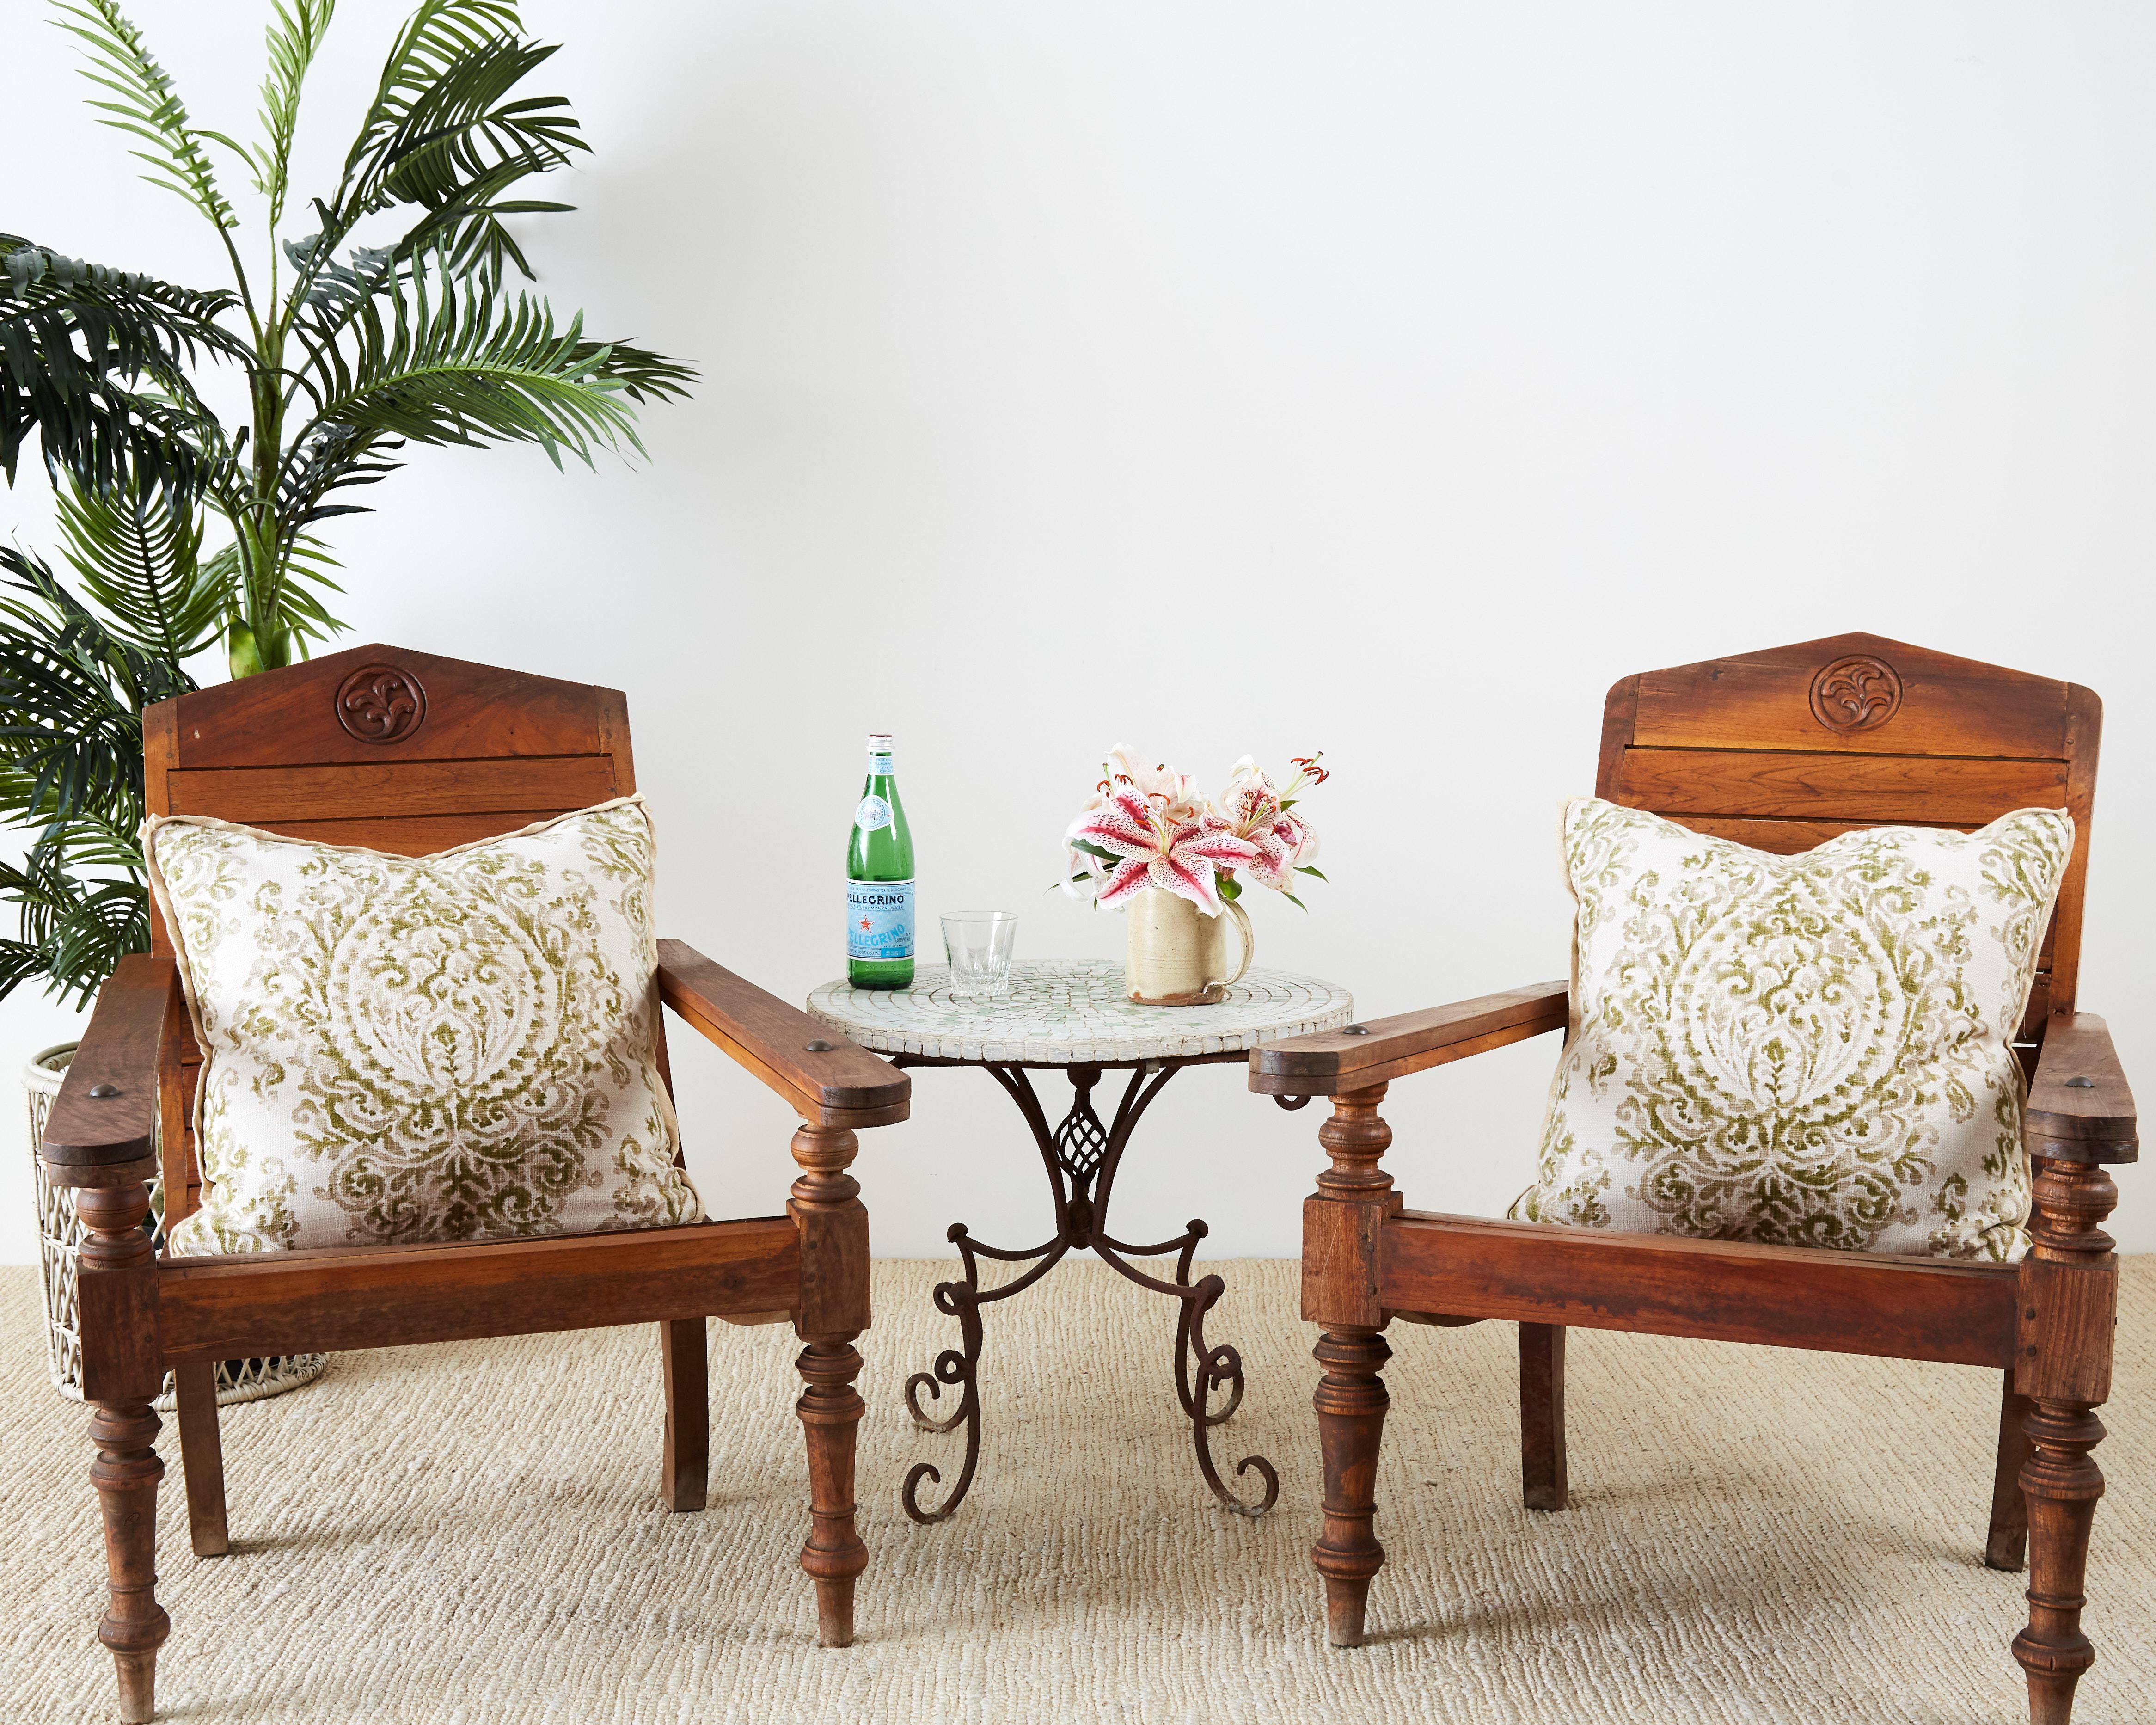 Handsome pair of hand carved teak plantation chairs made in the British Colonial style. Featuring fold-out leg supports and wood peg construction. Beautifully sculpted with a dramatic profile and ergonomic lounge seat. Supported by decorative turned